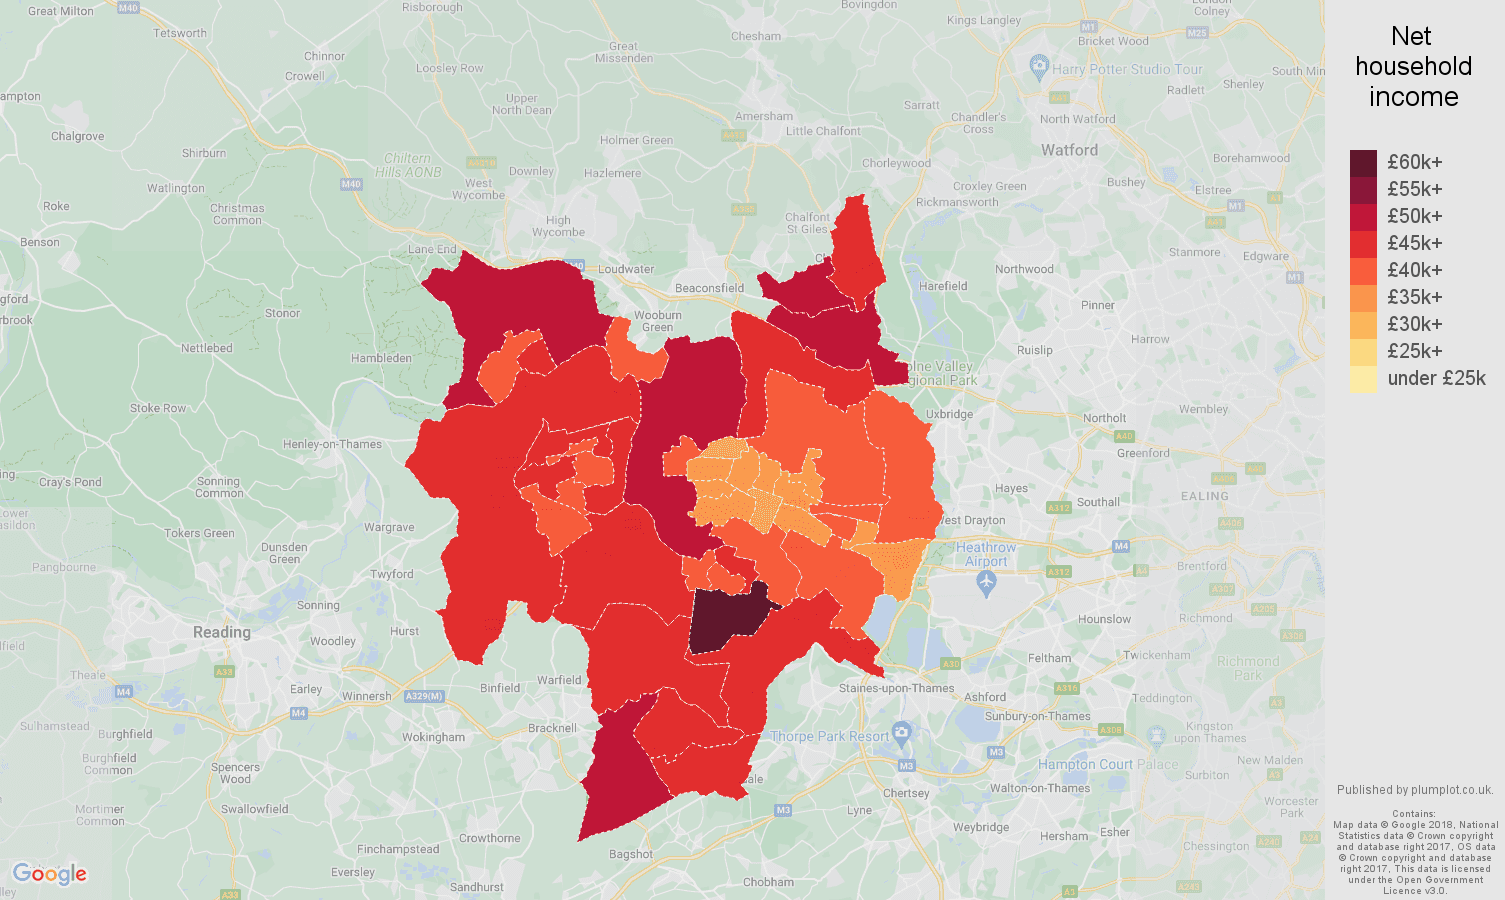 Slough net household income map